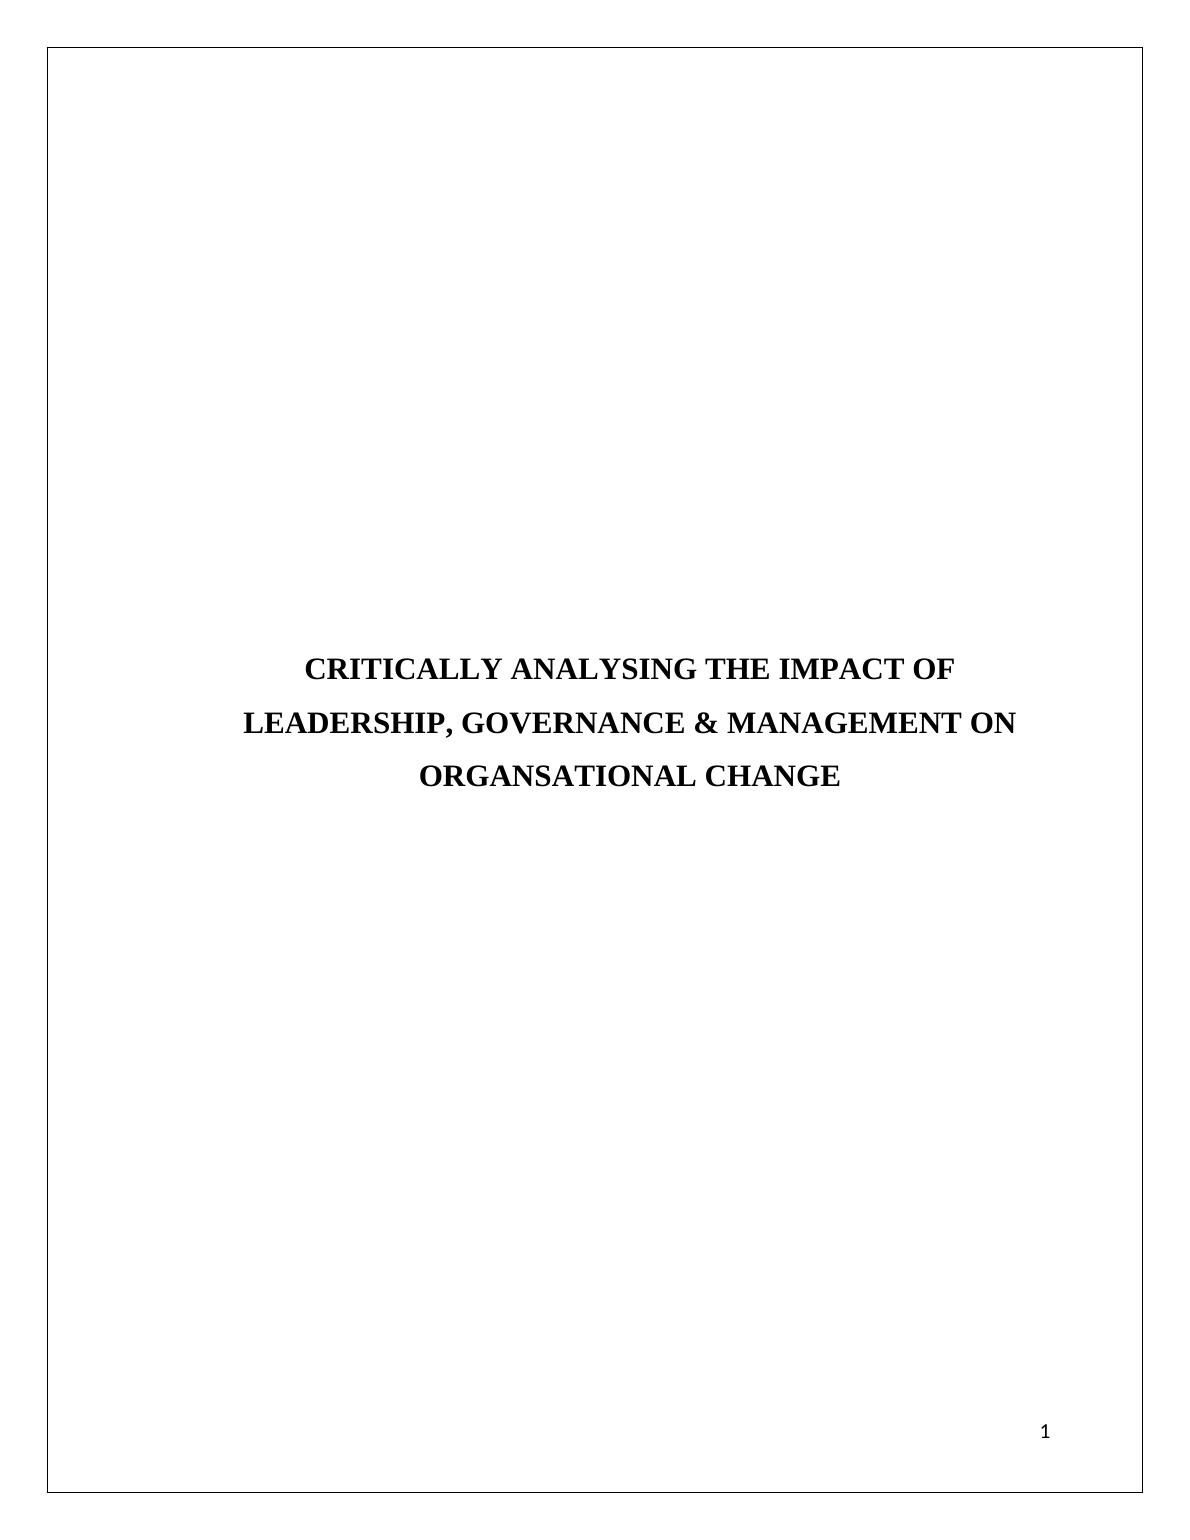 Analyzing The Impact Of Leadership, Governance & Management_1